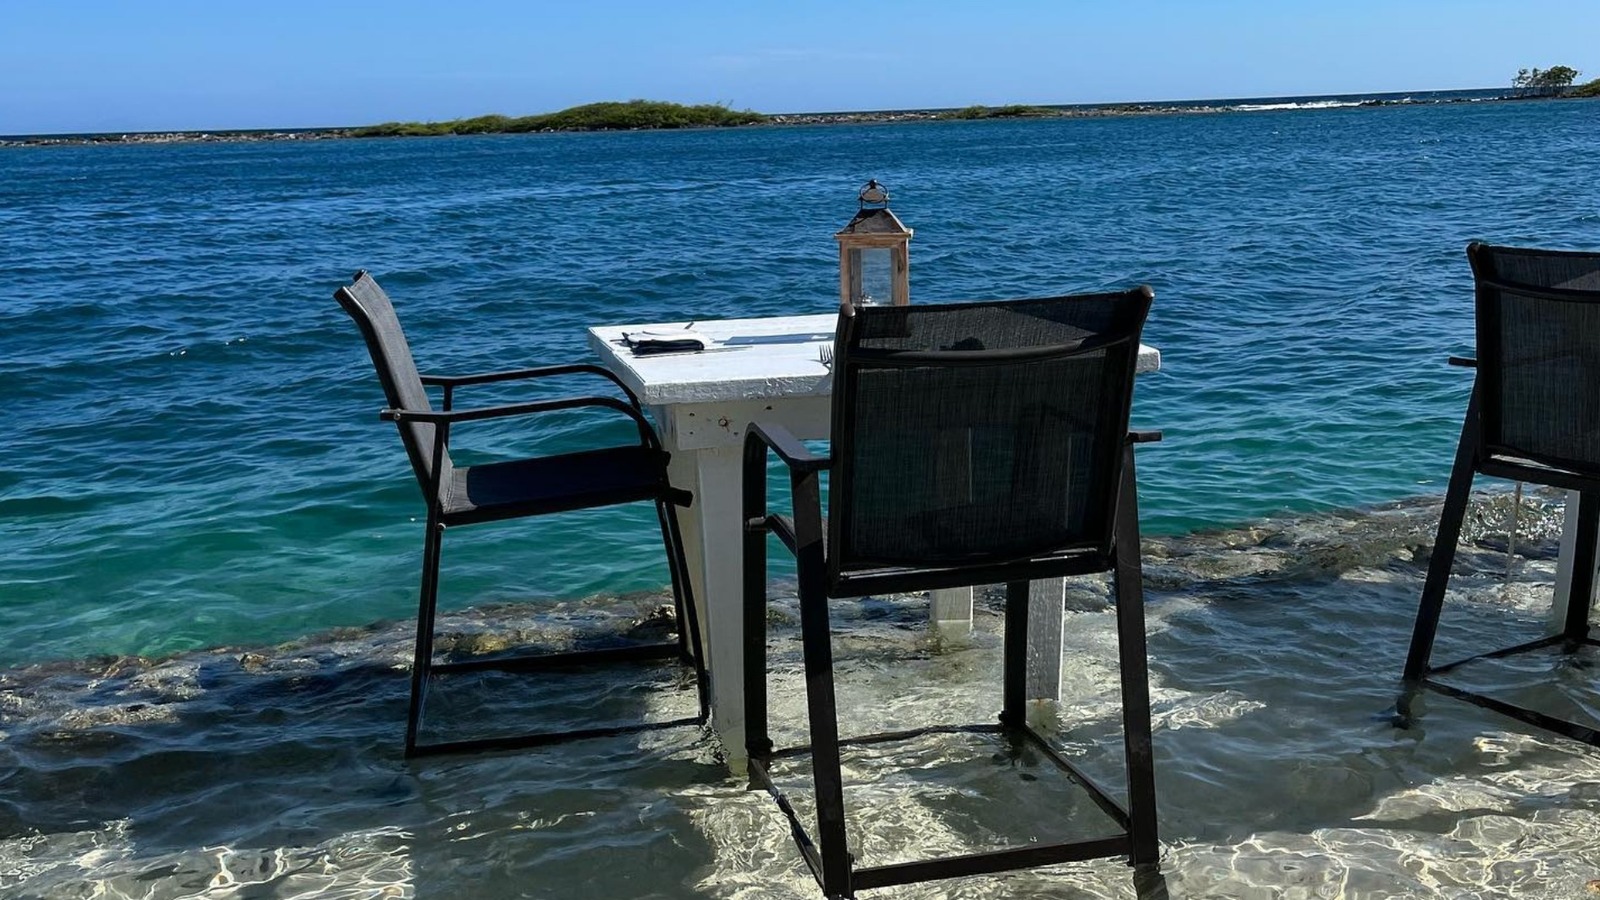 dip-your-toes-in-the-water-during-dinner-at-this-caribbean-island’s-most-unique-restaurant